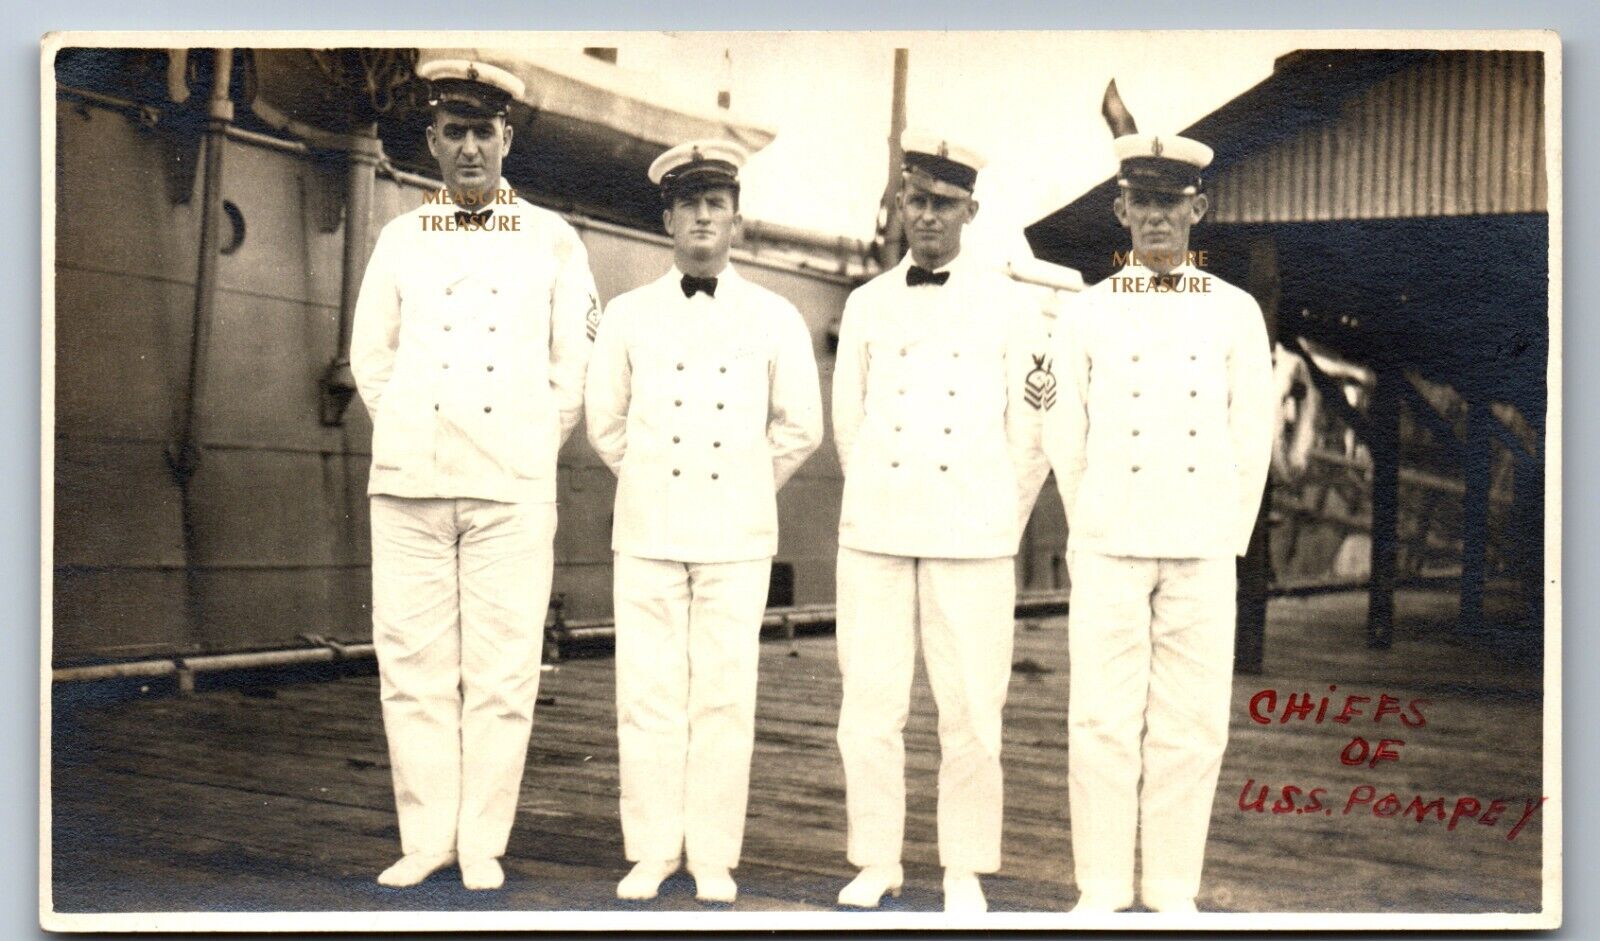 C.1915 WW1 CHIEFS OF USS POMPEY USN NAVY MILITARY OFFICERS SOLDIERS PHOTO F2